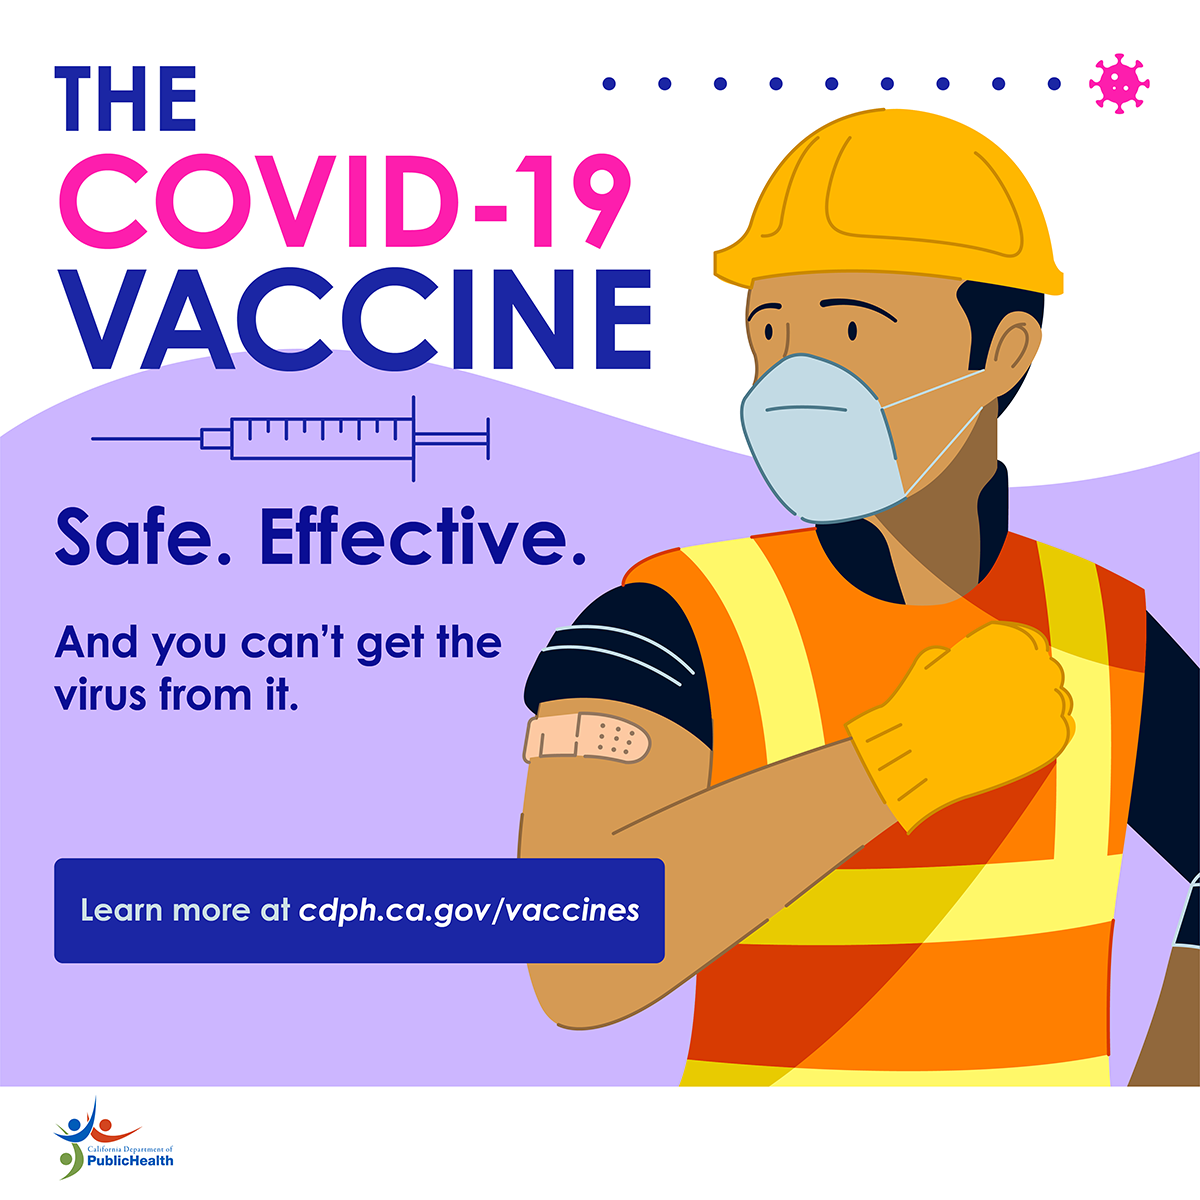 The COVID-19 vaccine. Safe. Effective. And you can't the the virus from it.